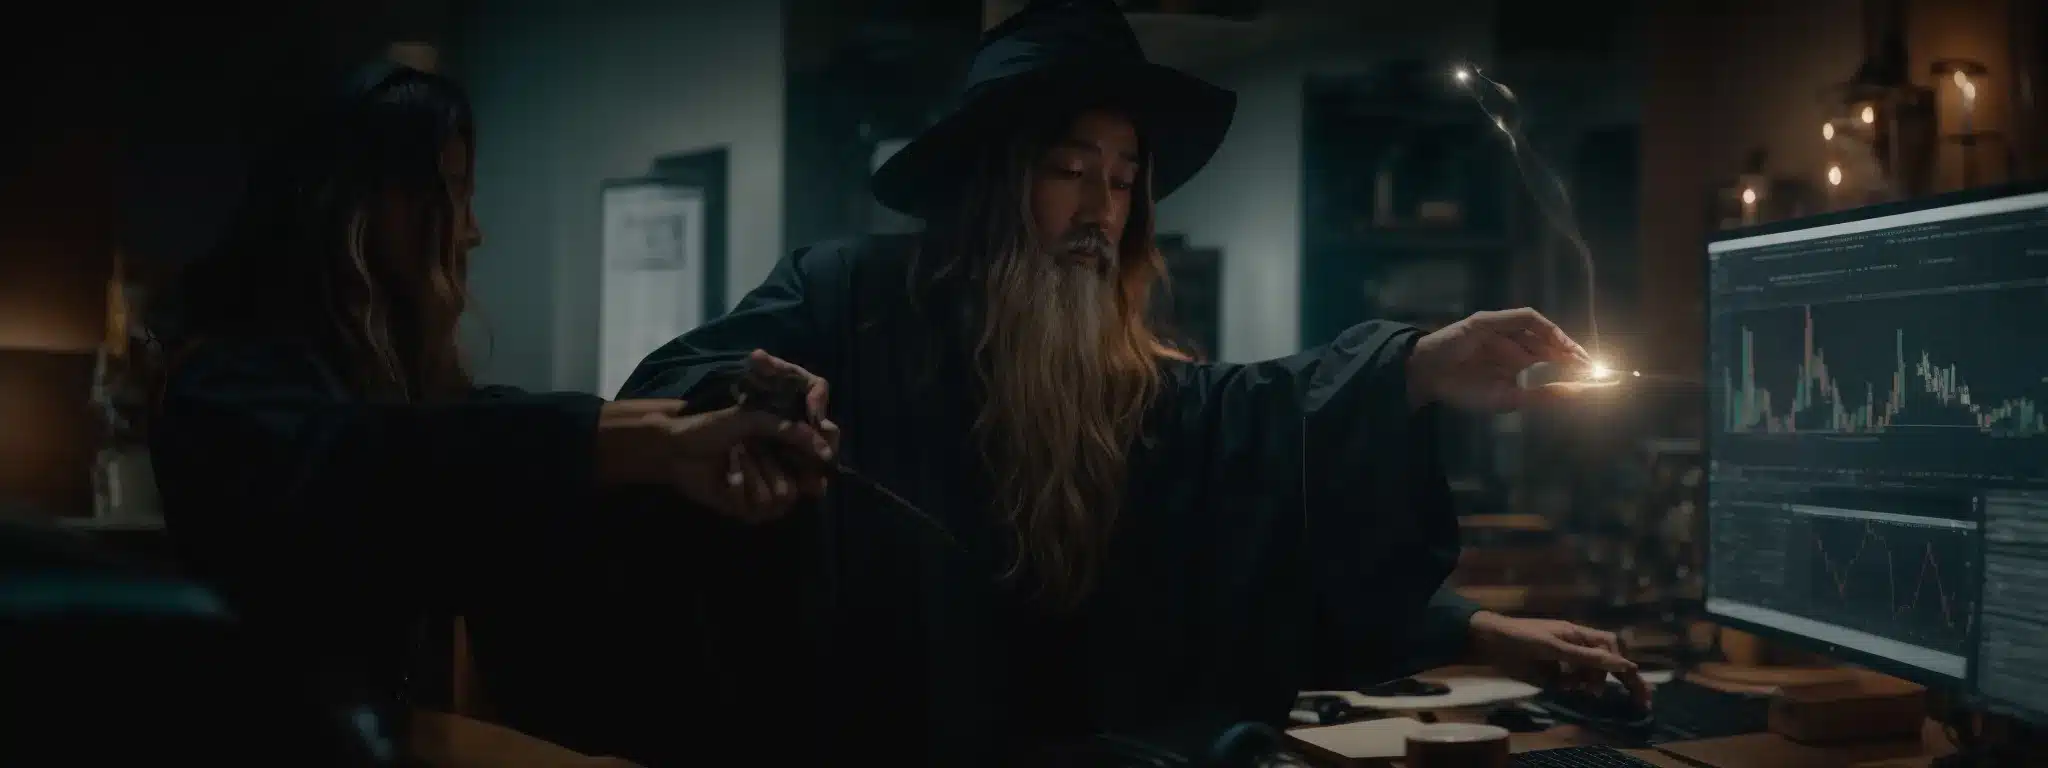 A Wizard Casting A Spell Over A Computer Screen Displaying Rising Graphs And Charts.